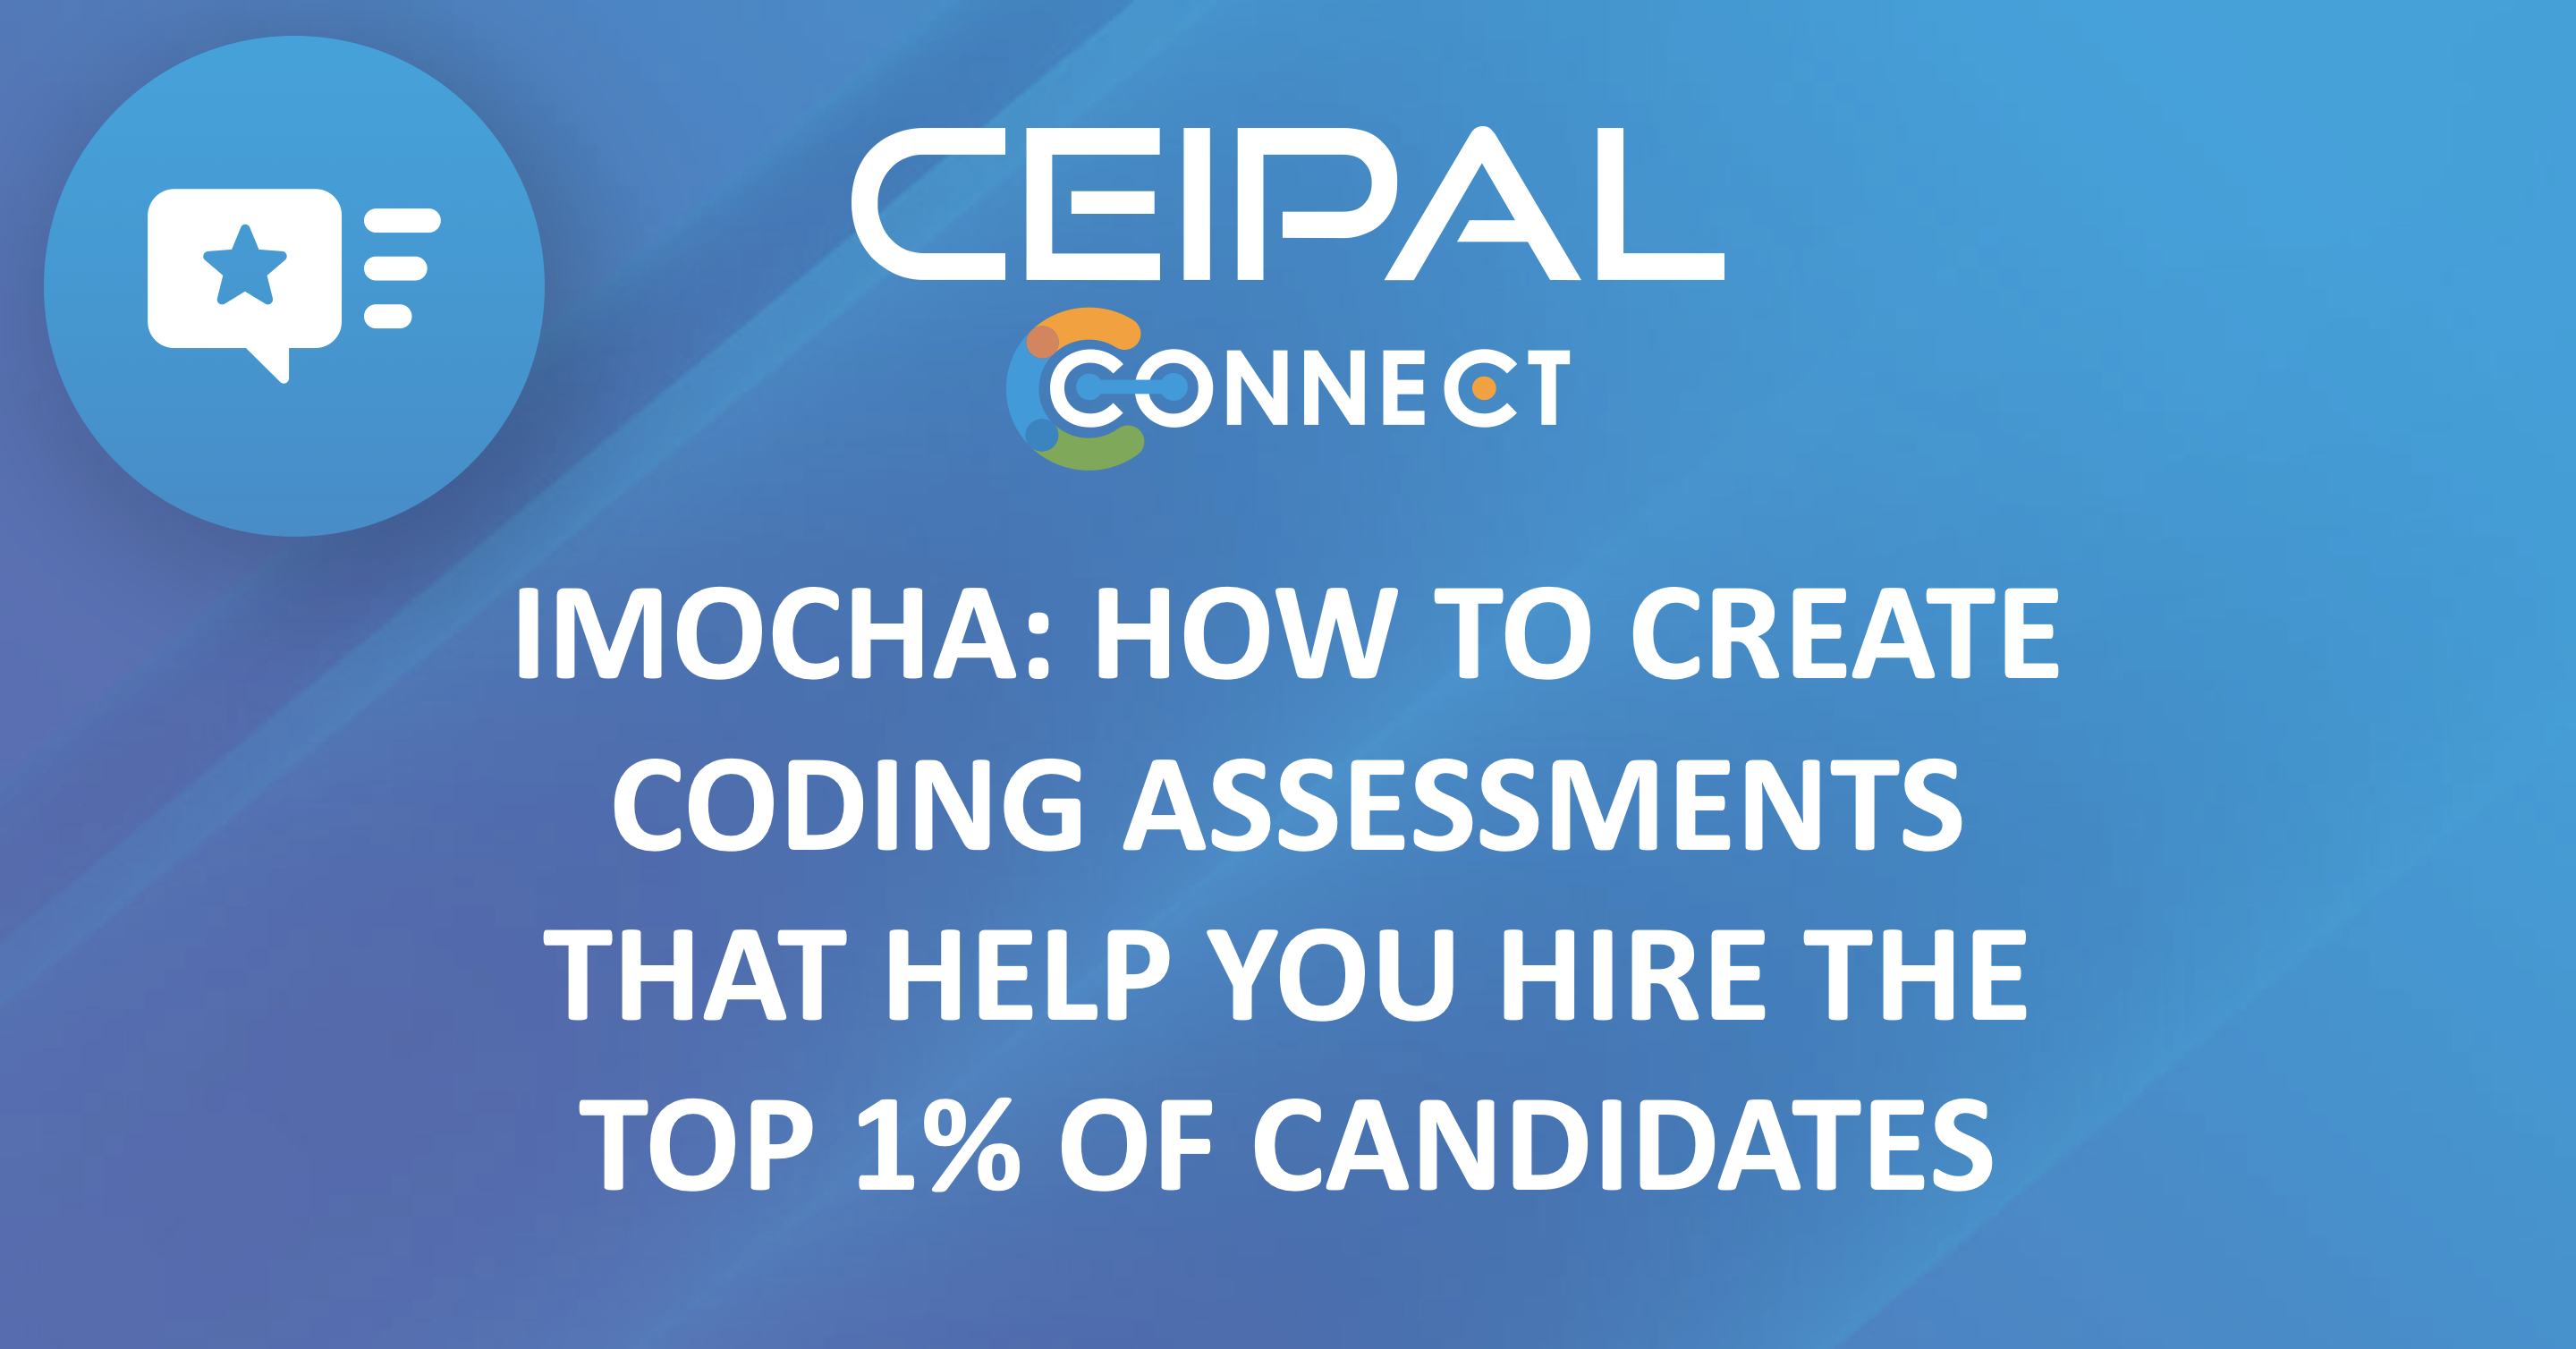 iMocha: How to create coding assessments that help you hire the top 1% candidates